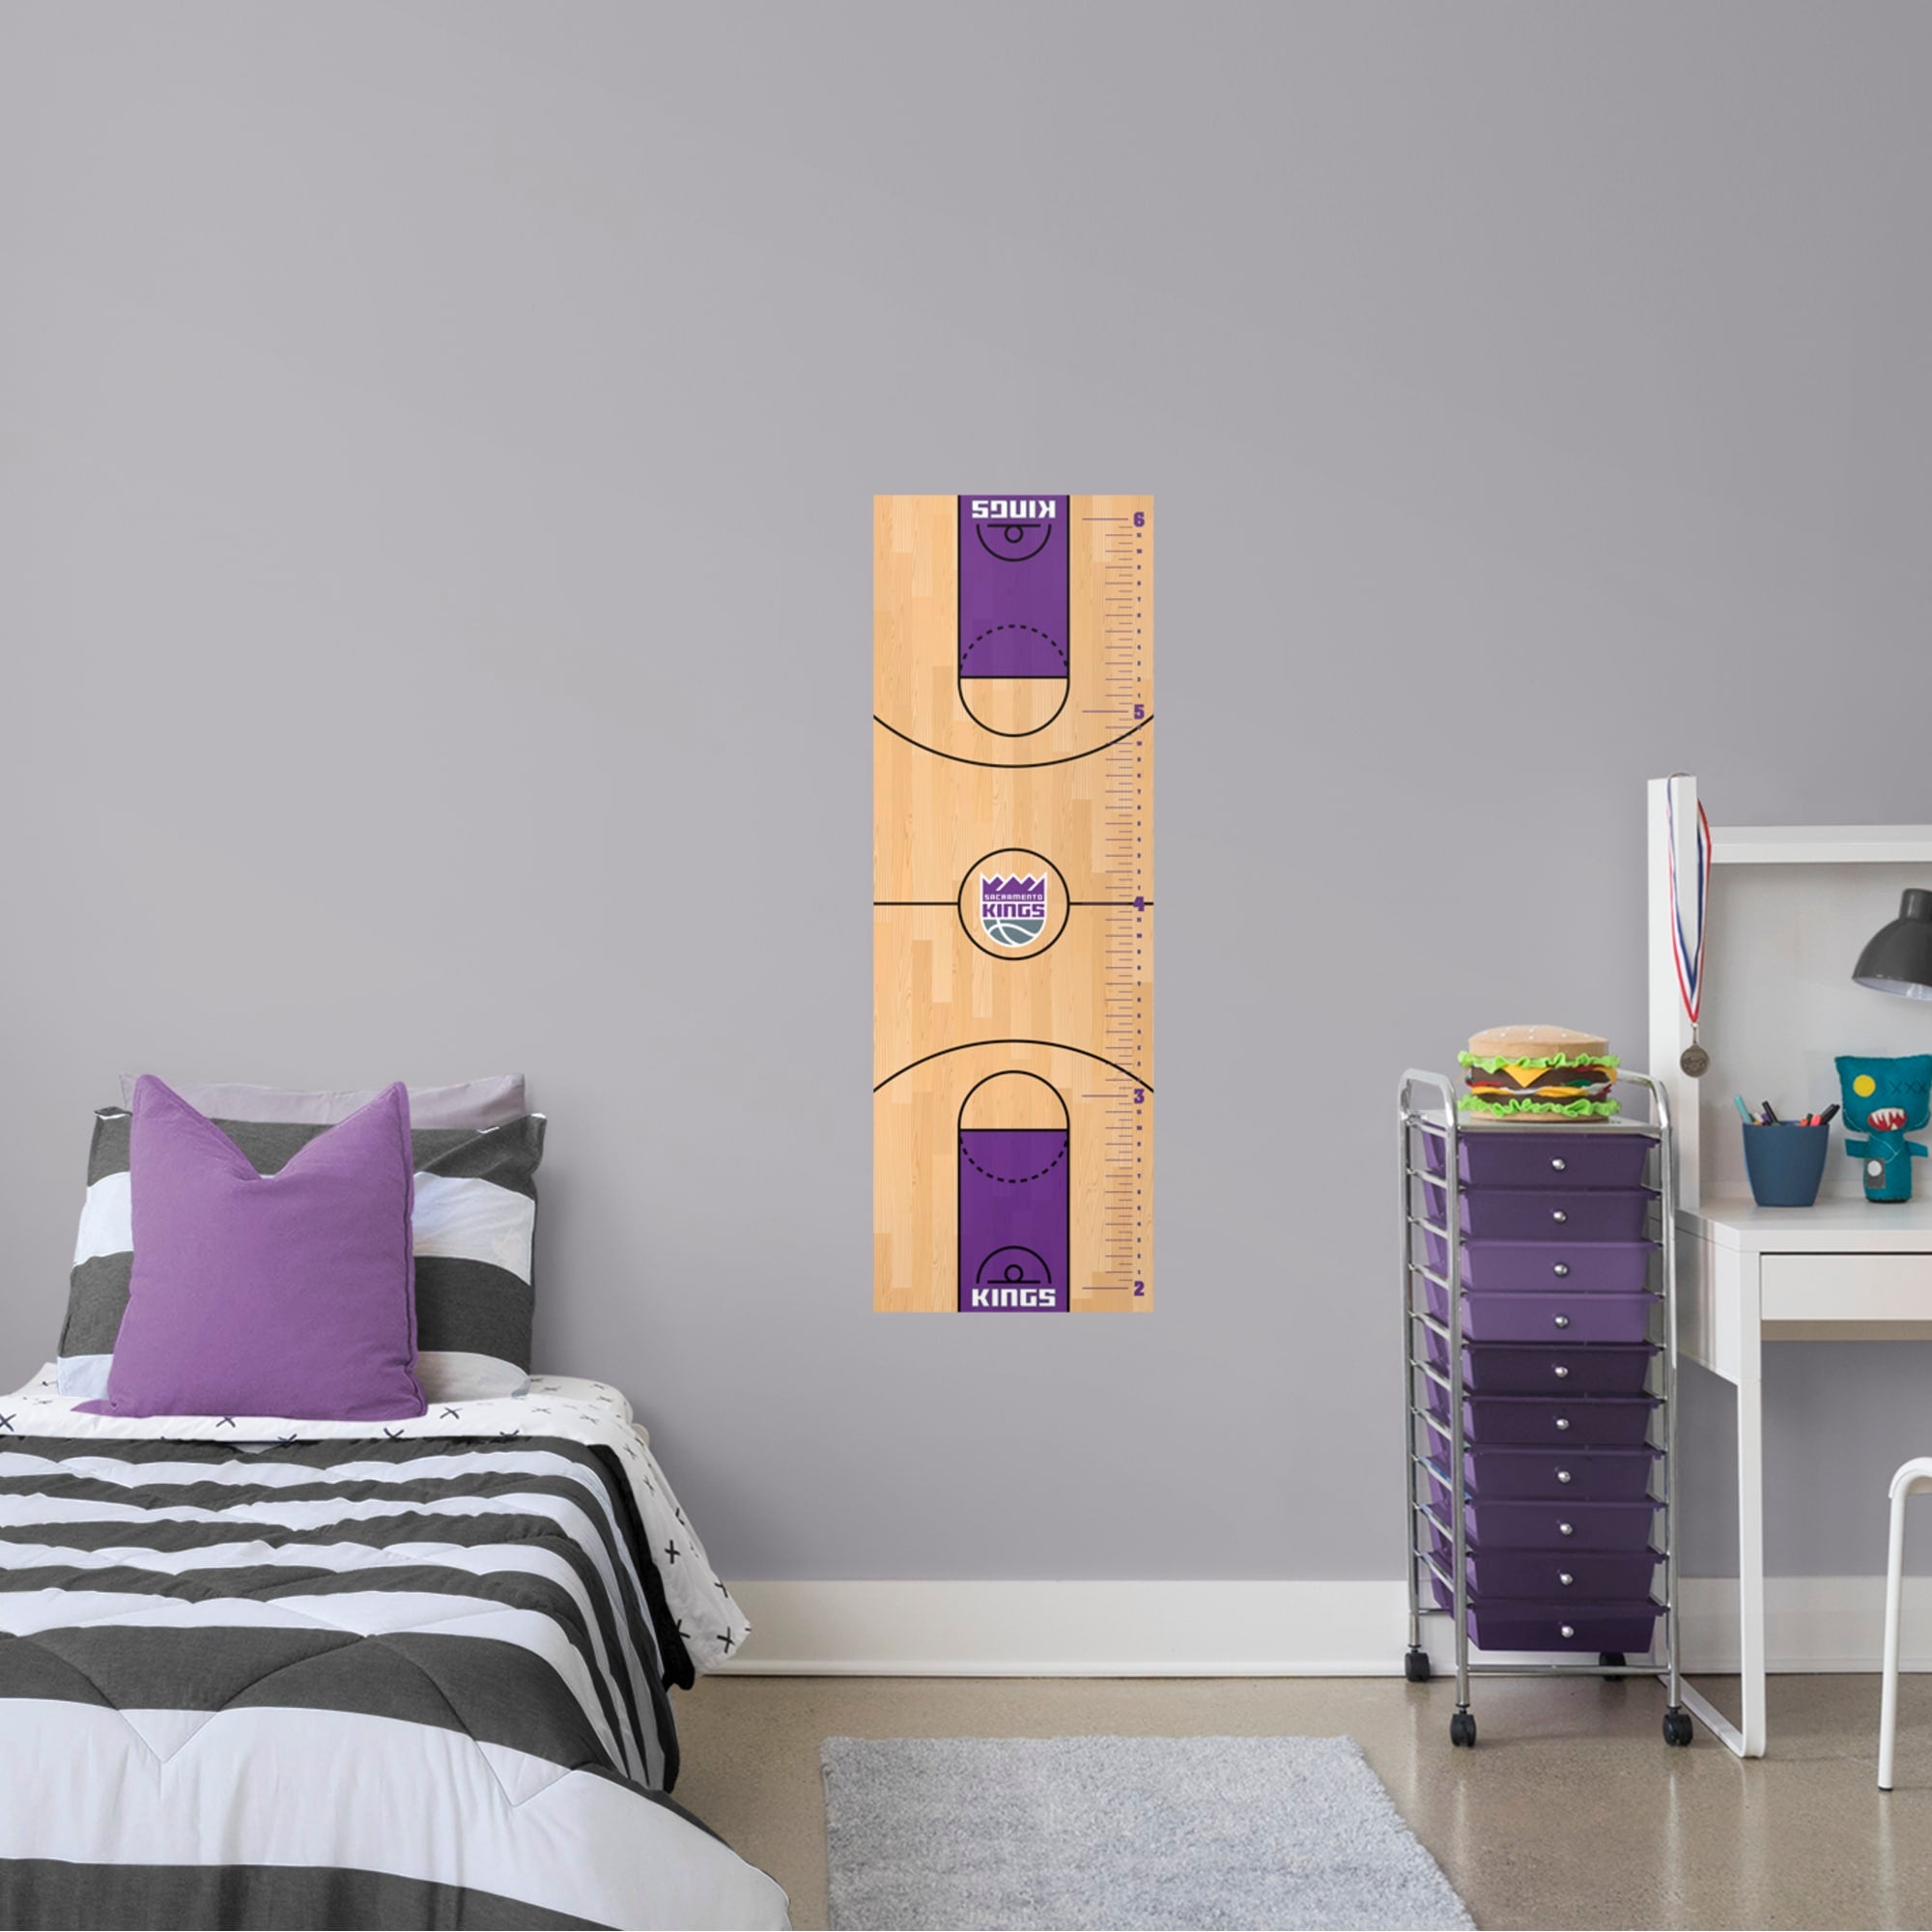 Sacramento Kings: Growth Chart - Officially Licensed NBA Removable Wall Decal 17.5"W x 51.0"H by Fathead | Vinyl